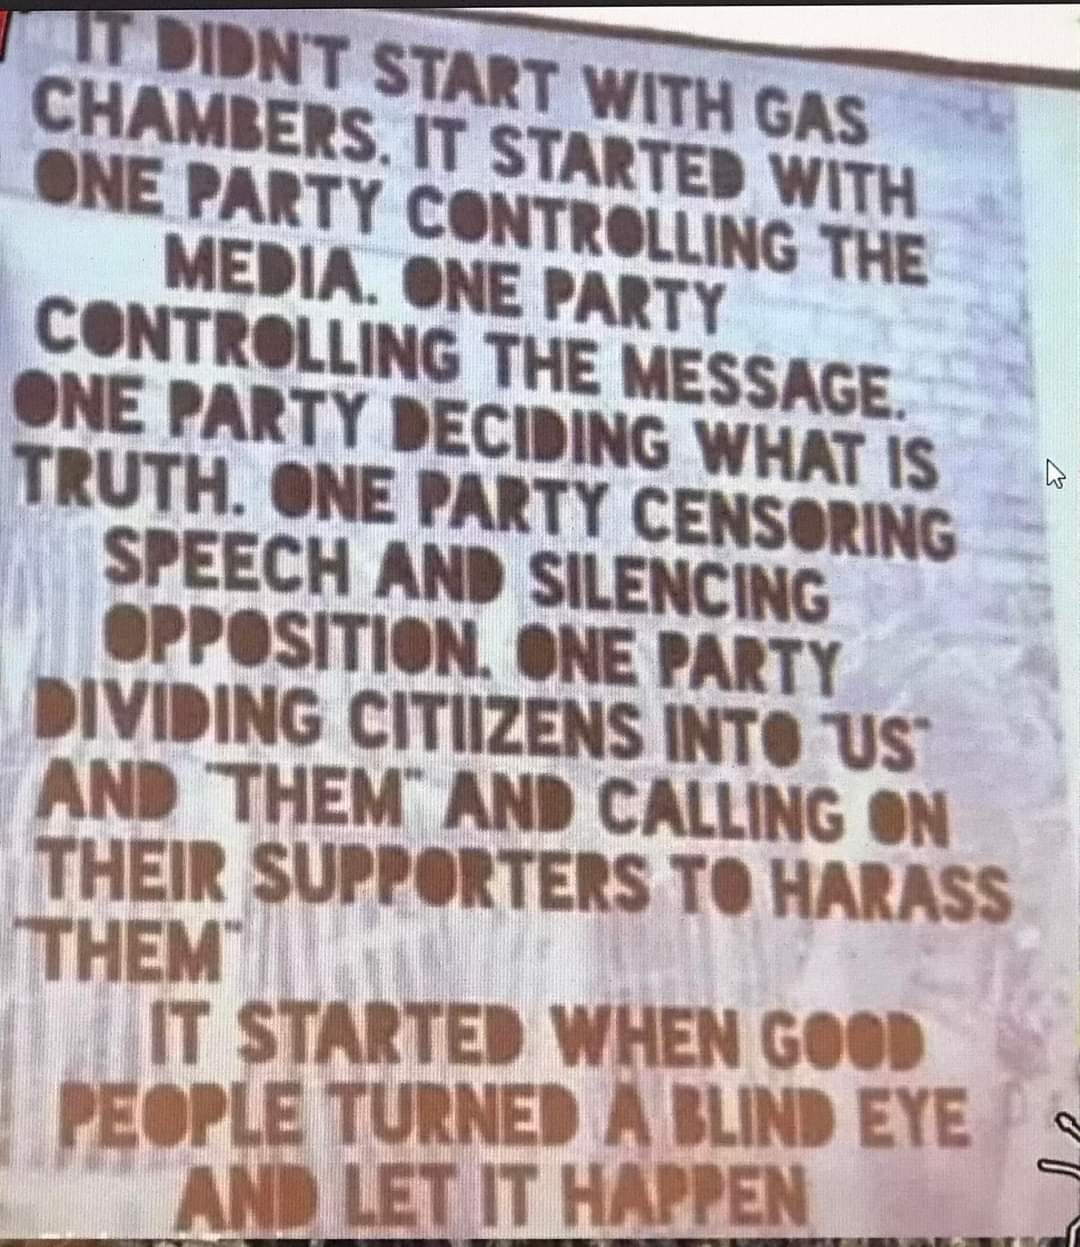 May be an image of text that says 'IT DIDN'T START WITH GAS CHAMBERS ONE PARTY IT CON WITH MEDIA. THE CONTROLLING ONE PARTY THE MESSAGE ONE PARTY DECIDING WHAT IS TRUTH. ONE PARTY CENSORING SPEECH AND SILENCING OPPOSITION. ONE PARTY DIVIDING CITIIZENS INTO US AND THEM AND CALLING ON THEIR SUPPORTERS TO HARASS THEM IT STARTED WHEN GOOD PEOPLE TURNED A BLIND EYE AND LET IT HAPPEN'